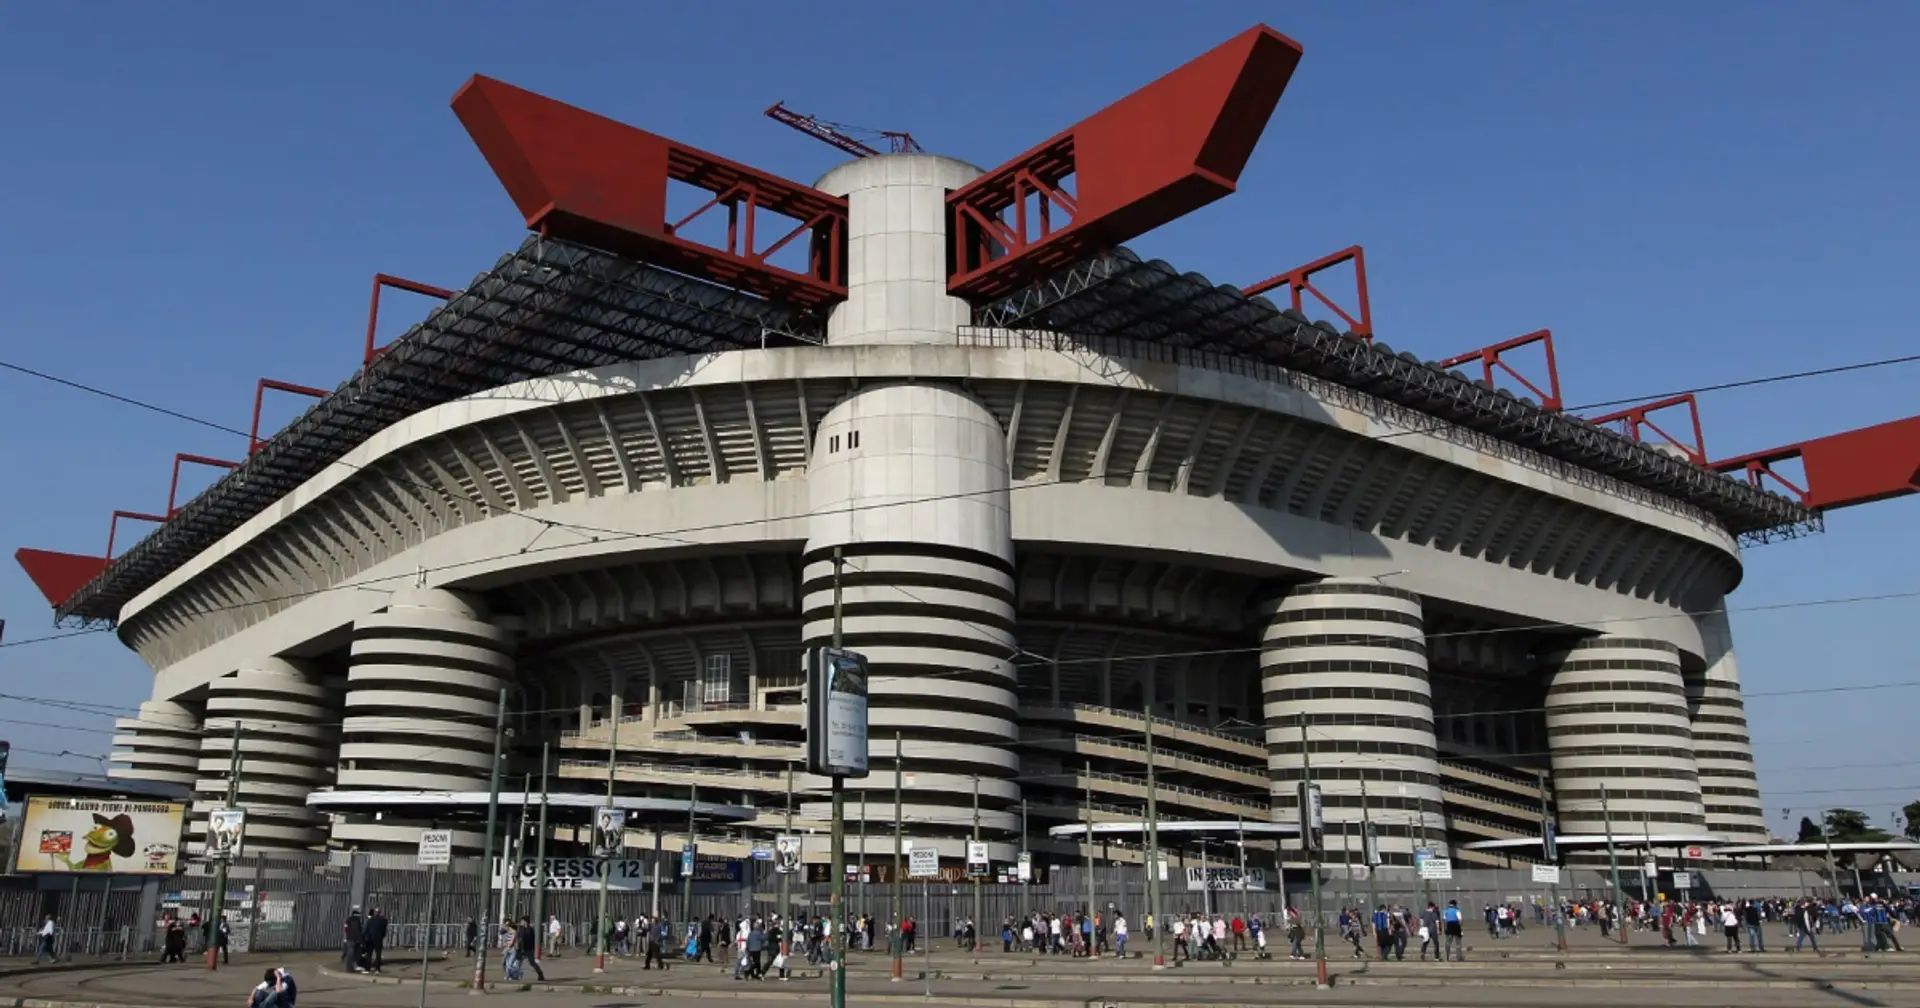 AC and Inter Milan’s iconic San Siro stadium cannot be demolished despite years of discussions